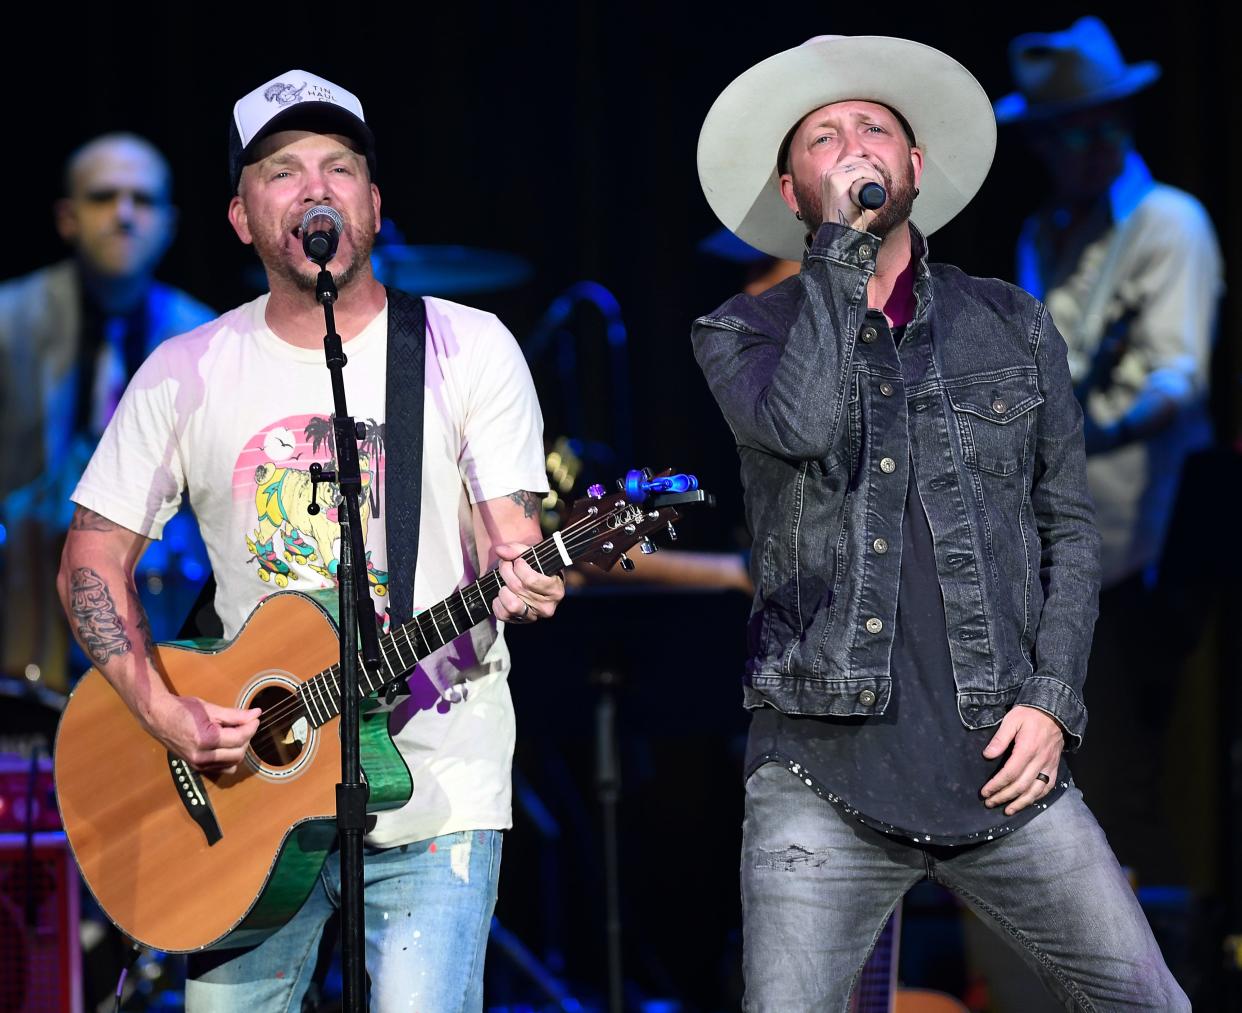 LoCash is headed to Freedom to headline Freedom Country Fest on June 7.